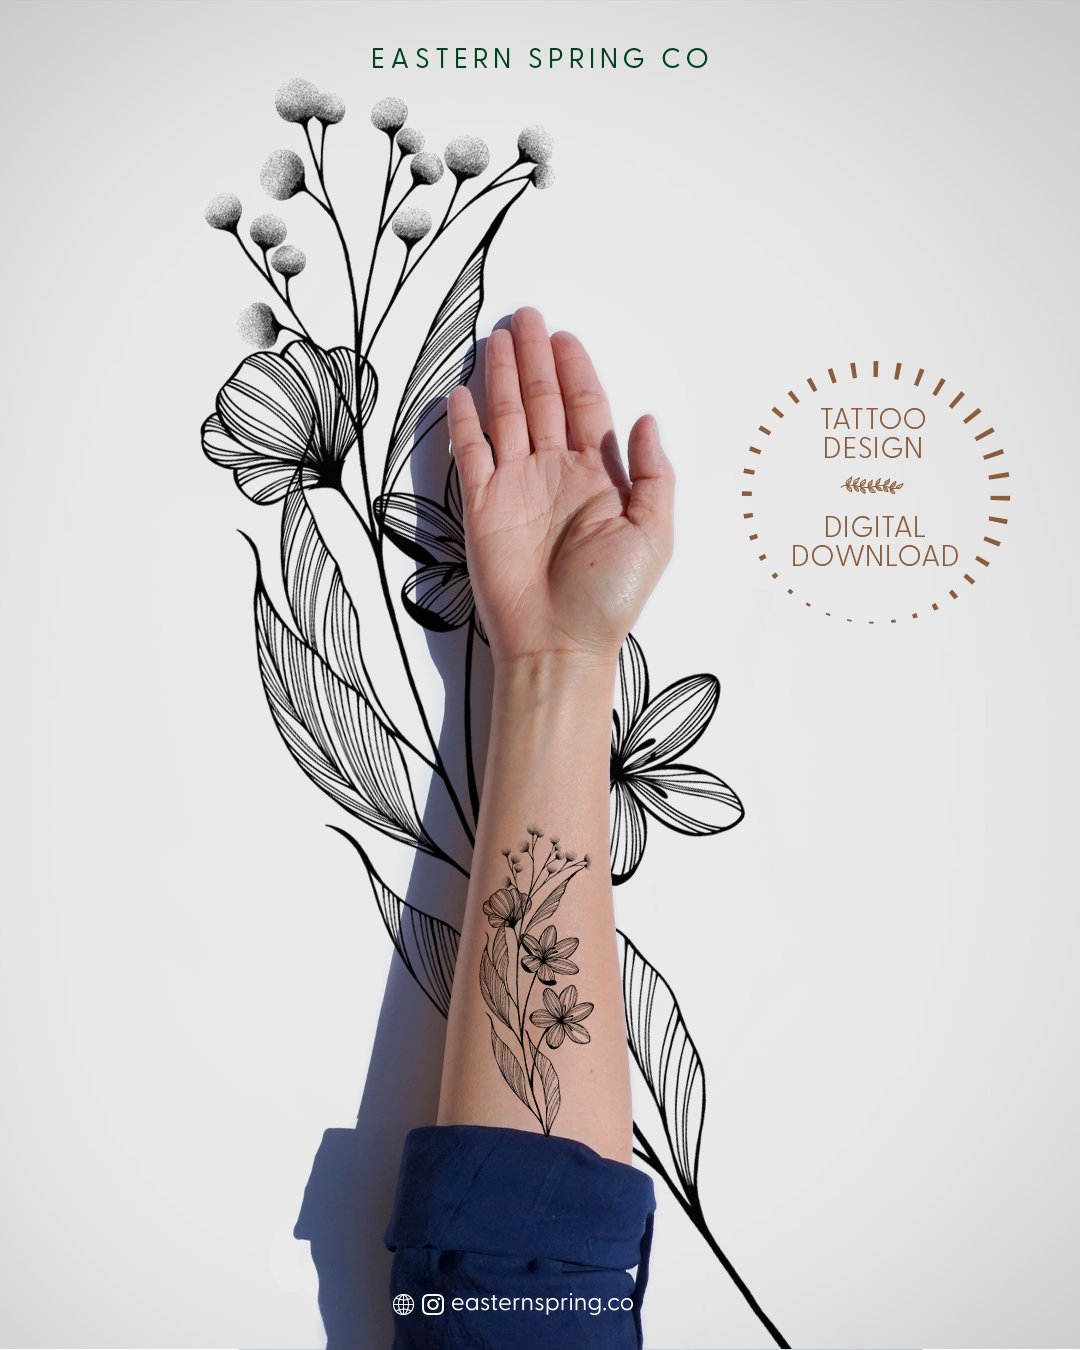 Eastern Spring Co artistic tattoo design, Blooming Wildflower